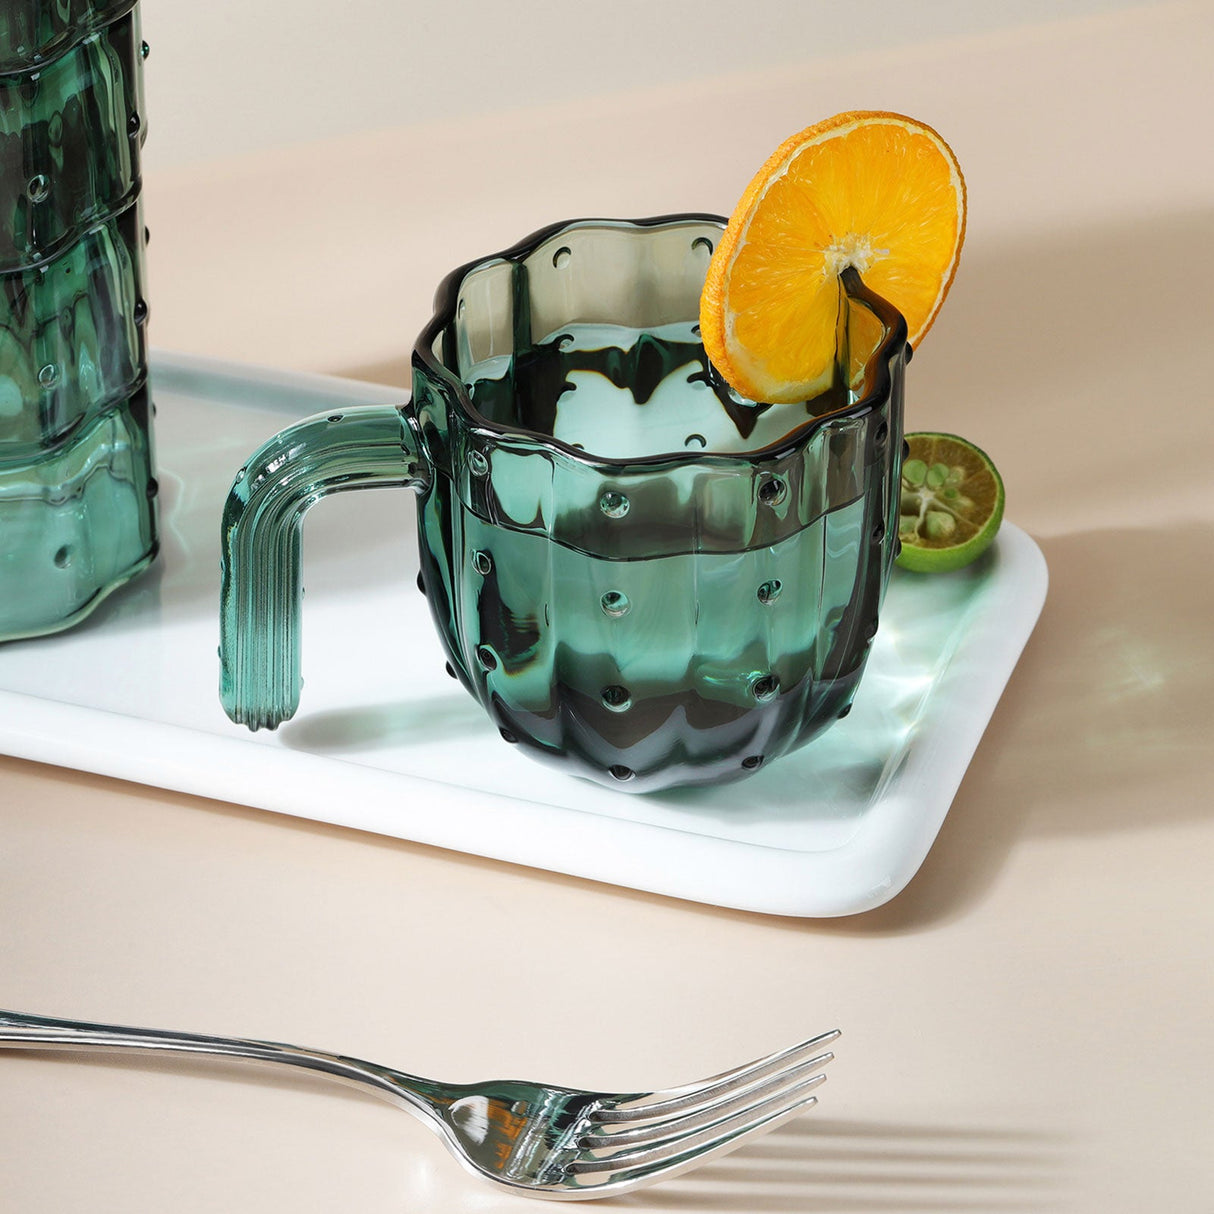 Green Stackable Cactus Drinking Glasses